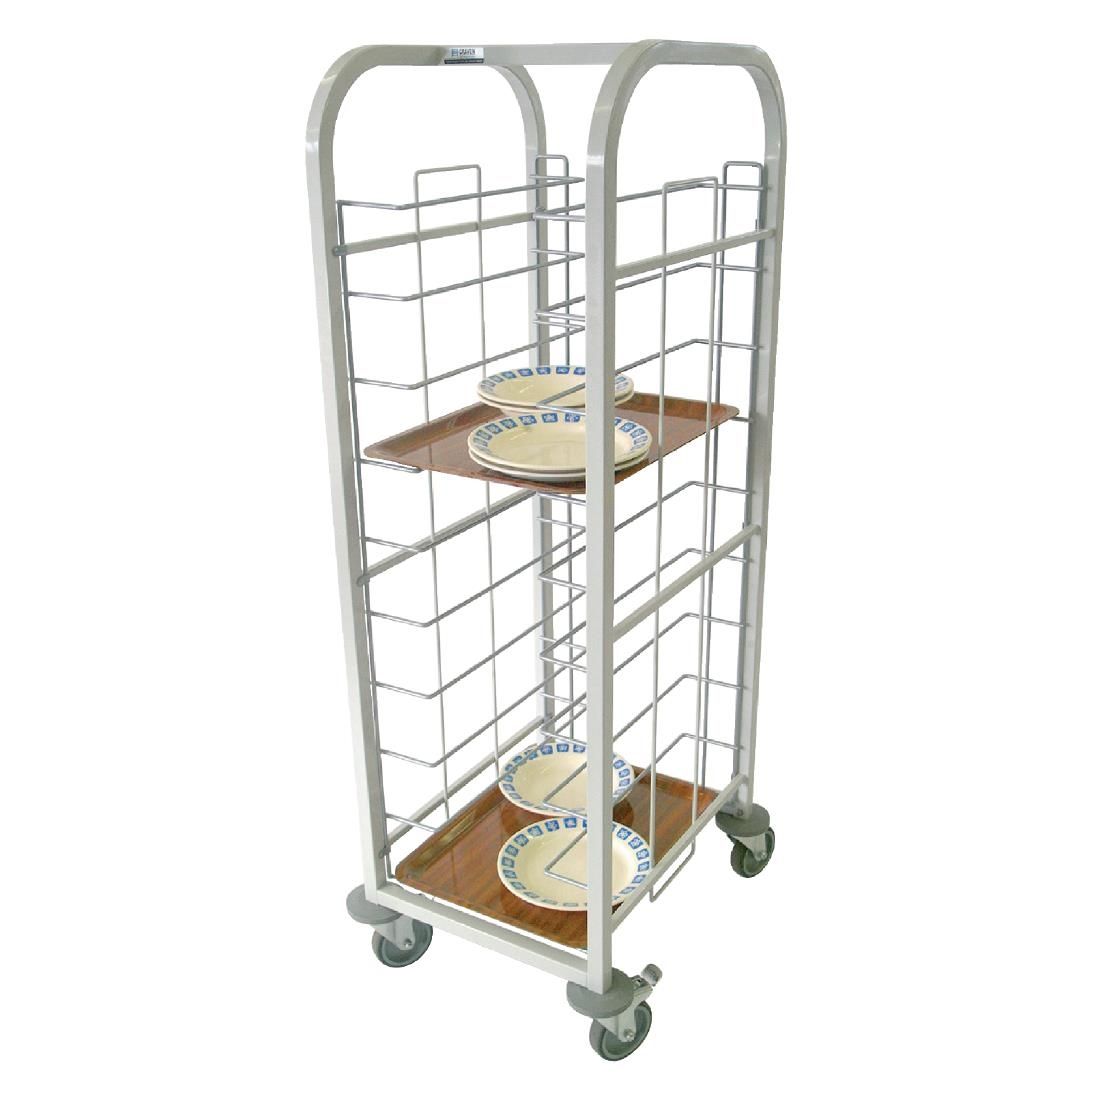 Craven Steel Self Clearing Trolley 10 Shelves JD Catering Equipment Solutions Ltd